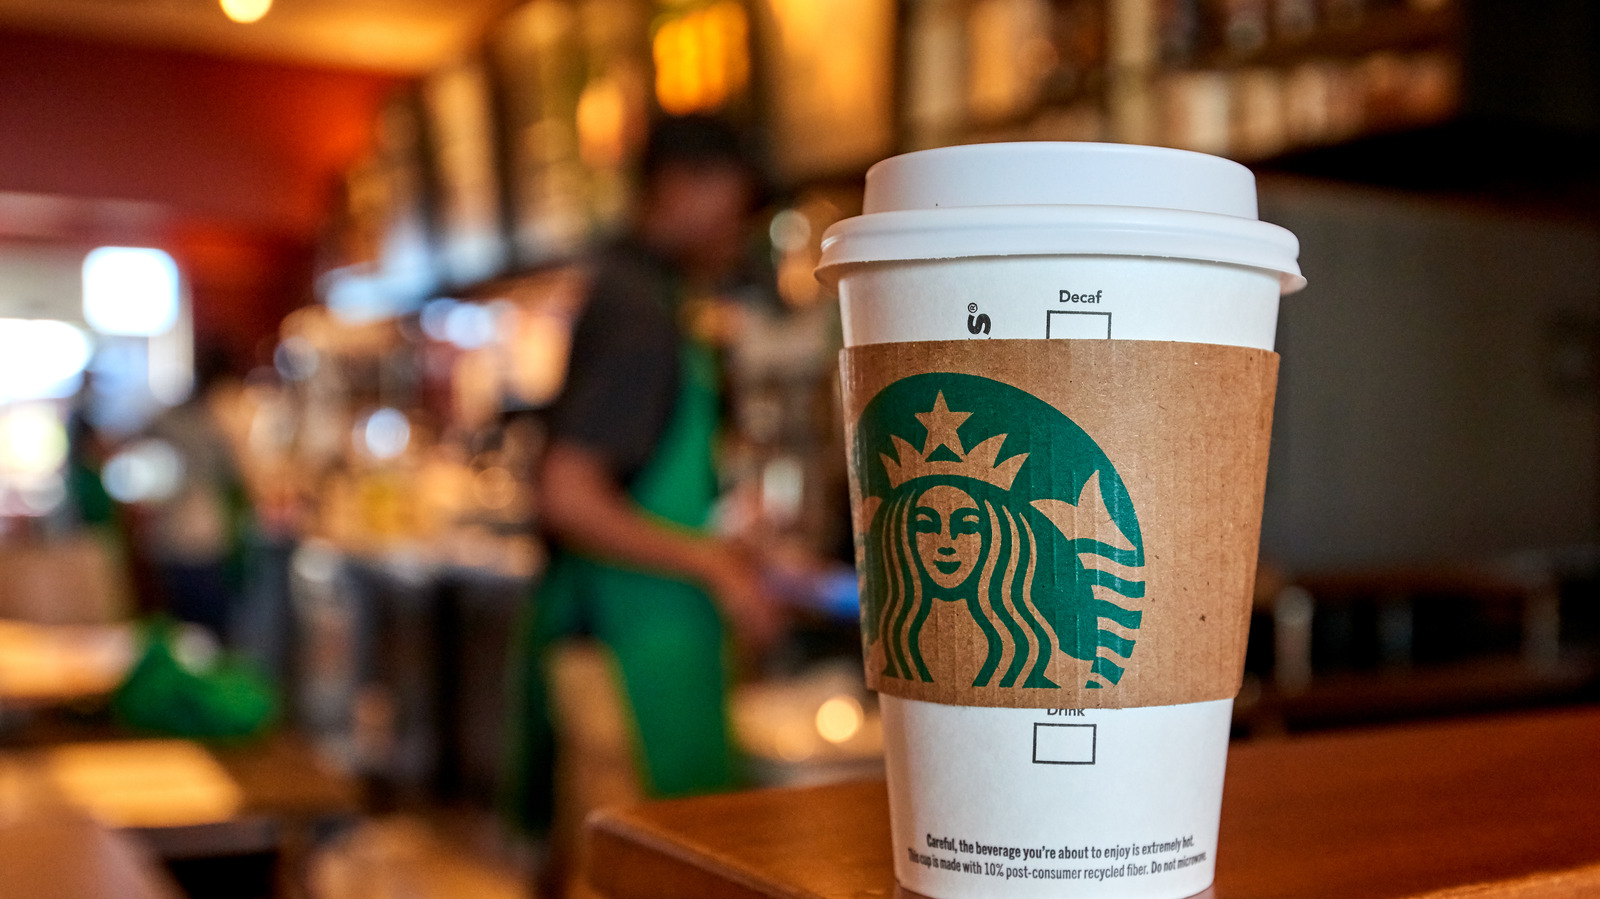 Starbucks Customer Upset After Getting Iced Drink In Paper Cup